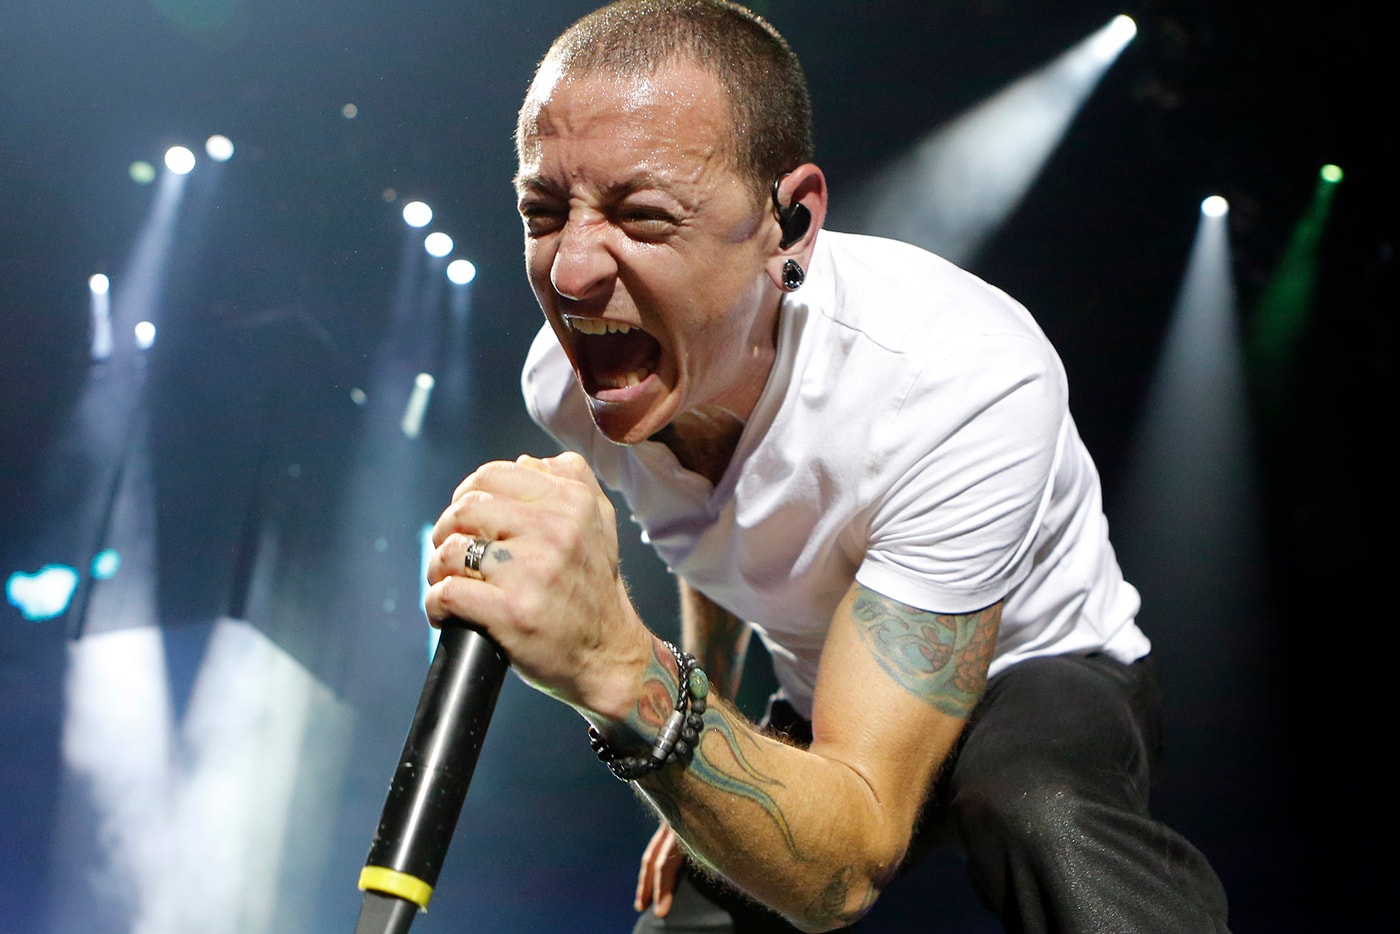 Chester Bennington Linkin Park Dead Died Passed suicide death 41 hanging hung singer songwriter musician